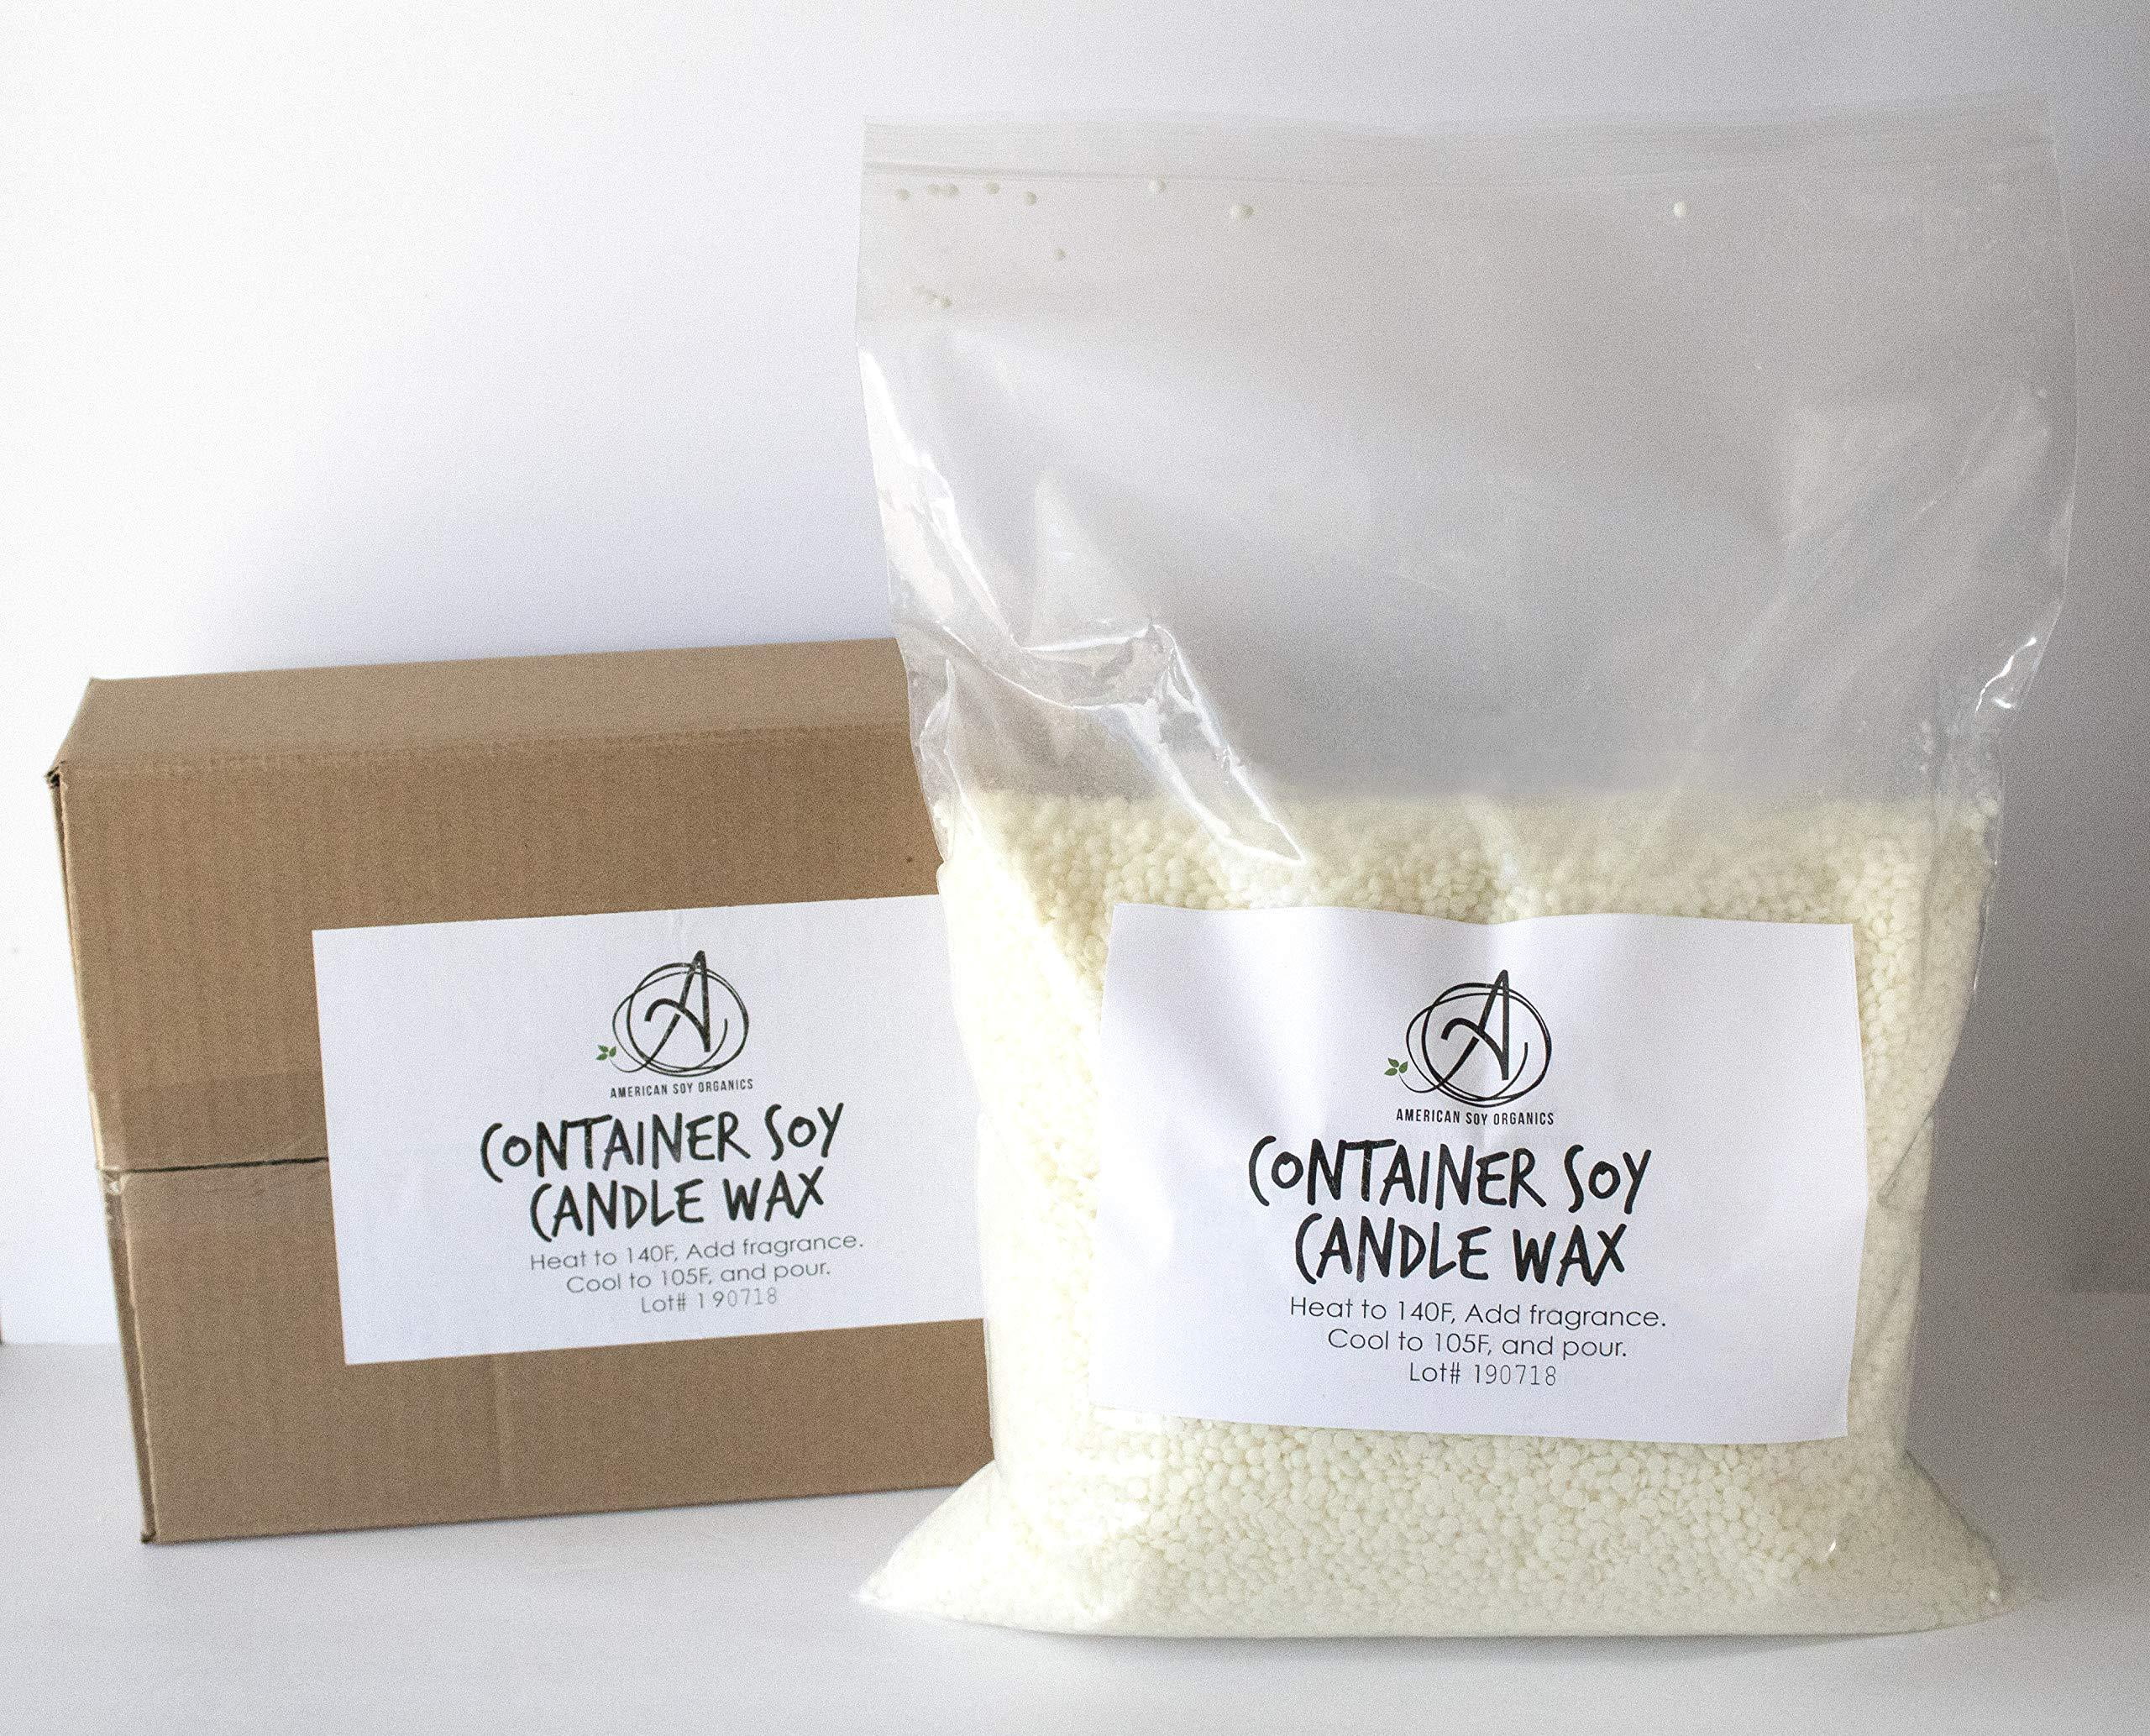 American Soy Organics Midwest Container Soy Wax: 10 lb Bag of